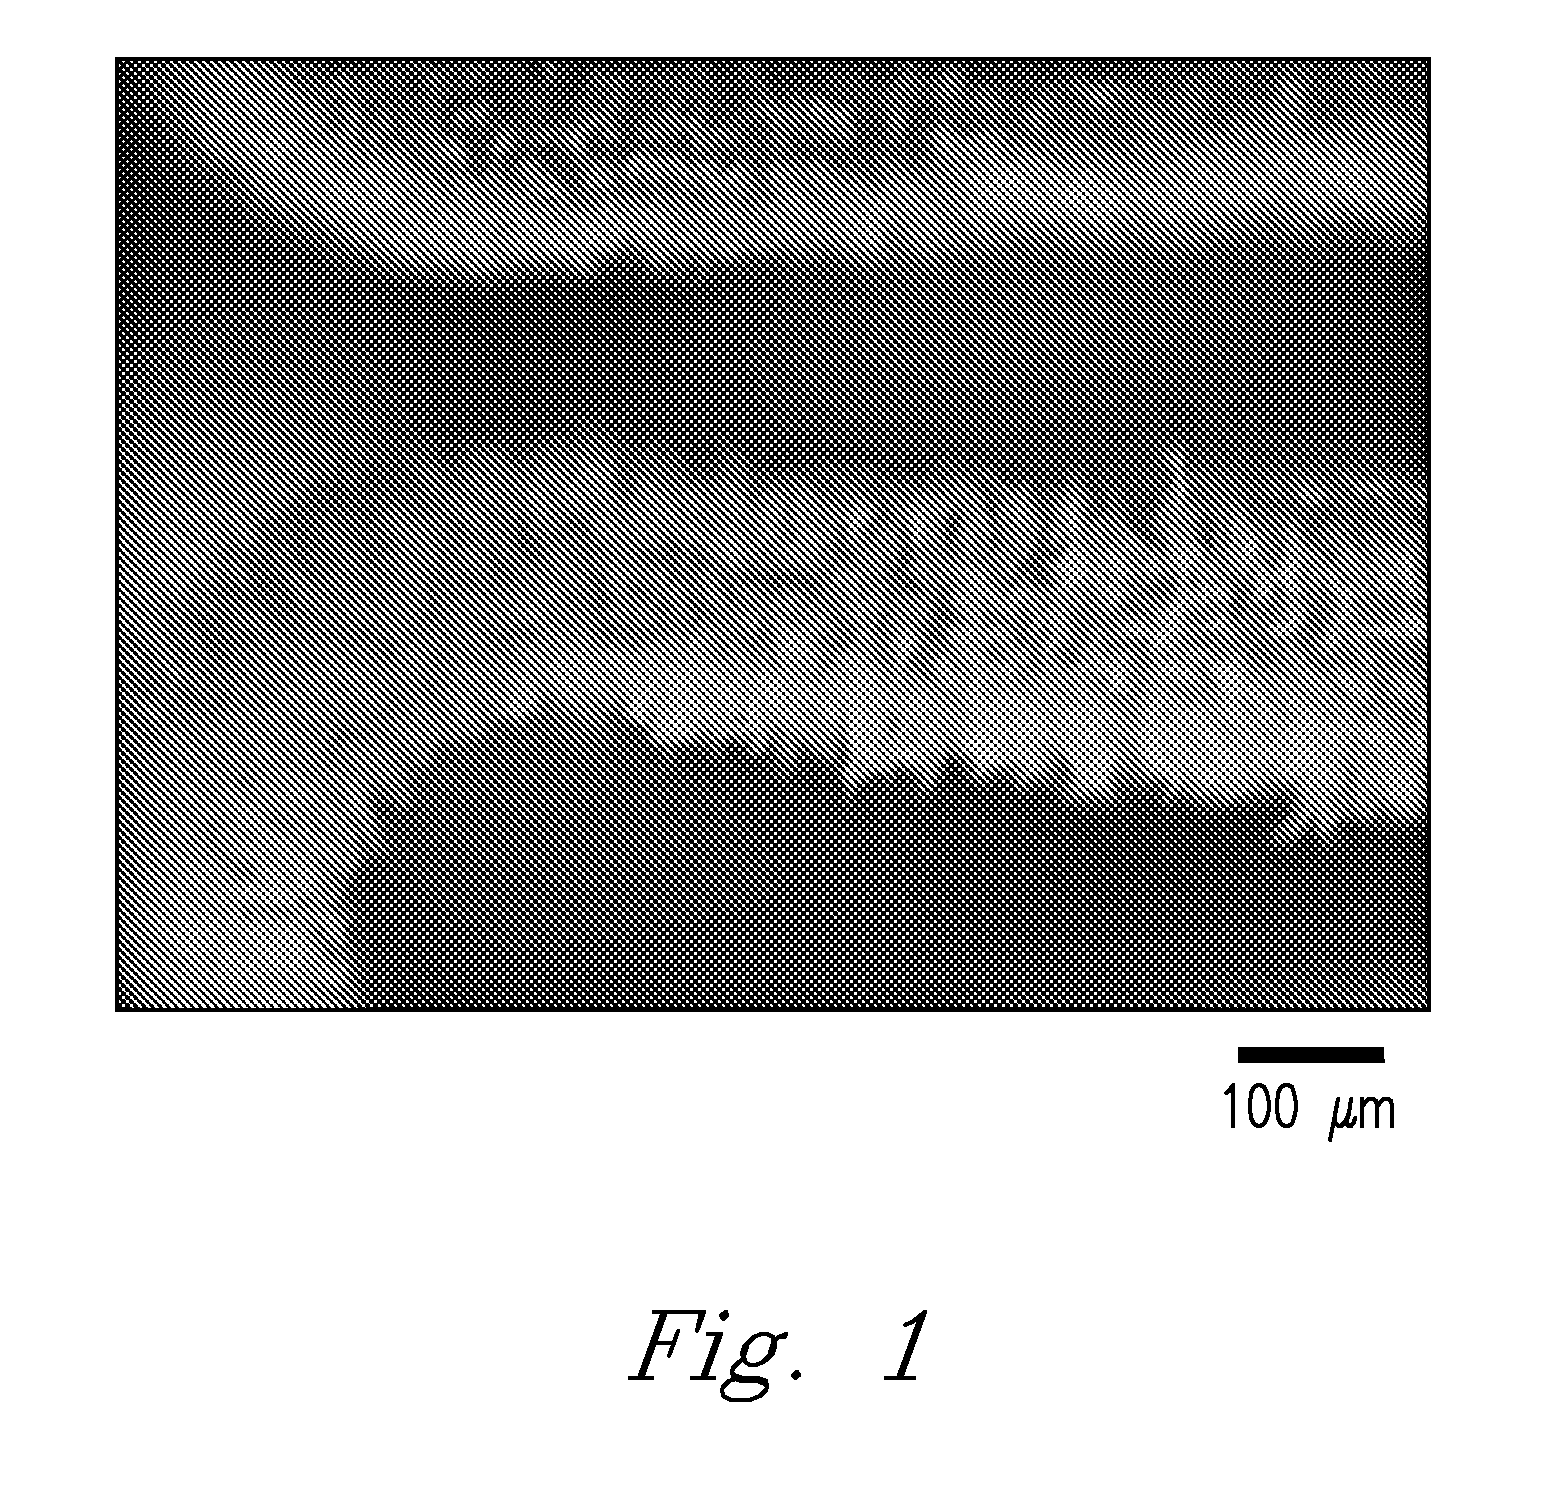 System and method for enhanced electrostatic deposition and surface coatings